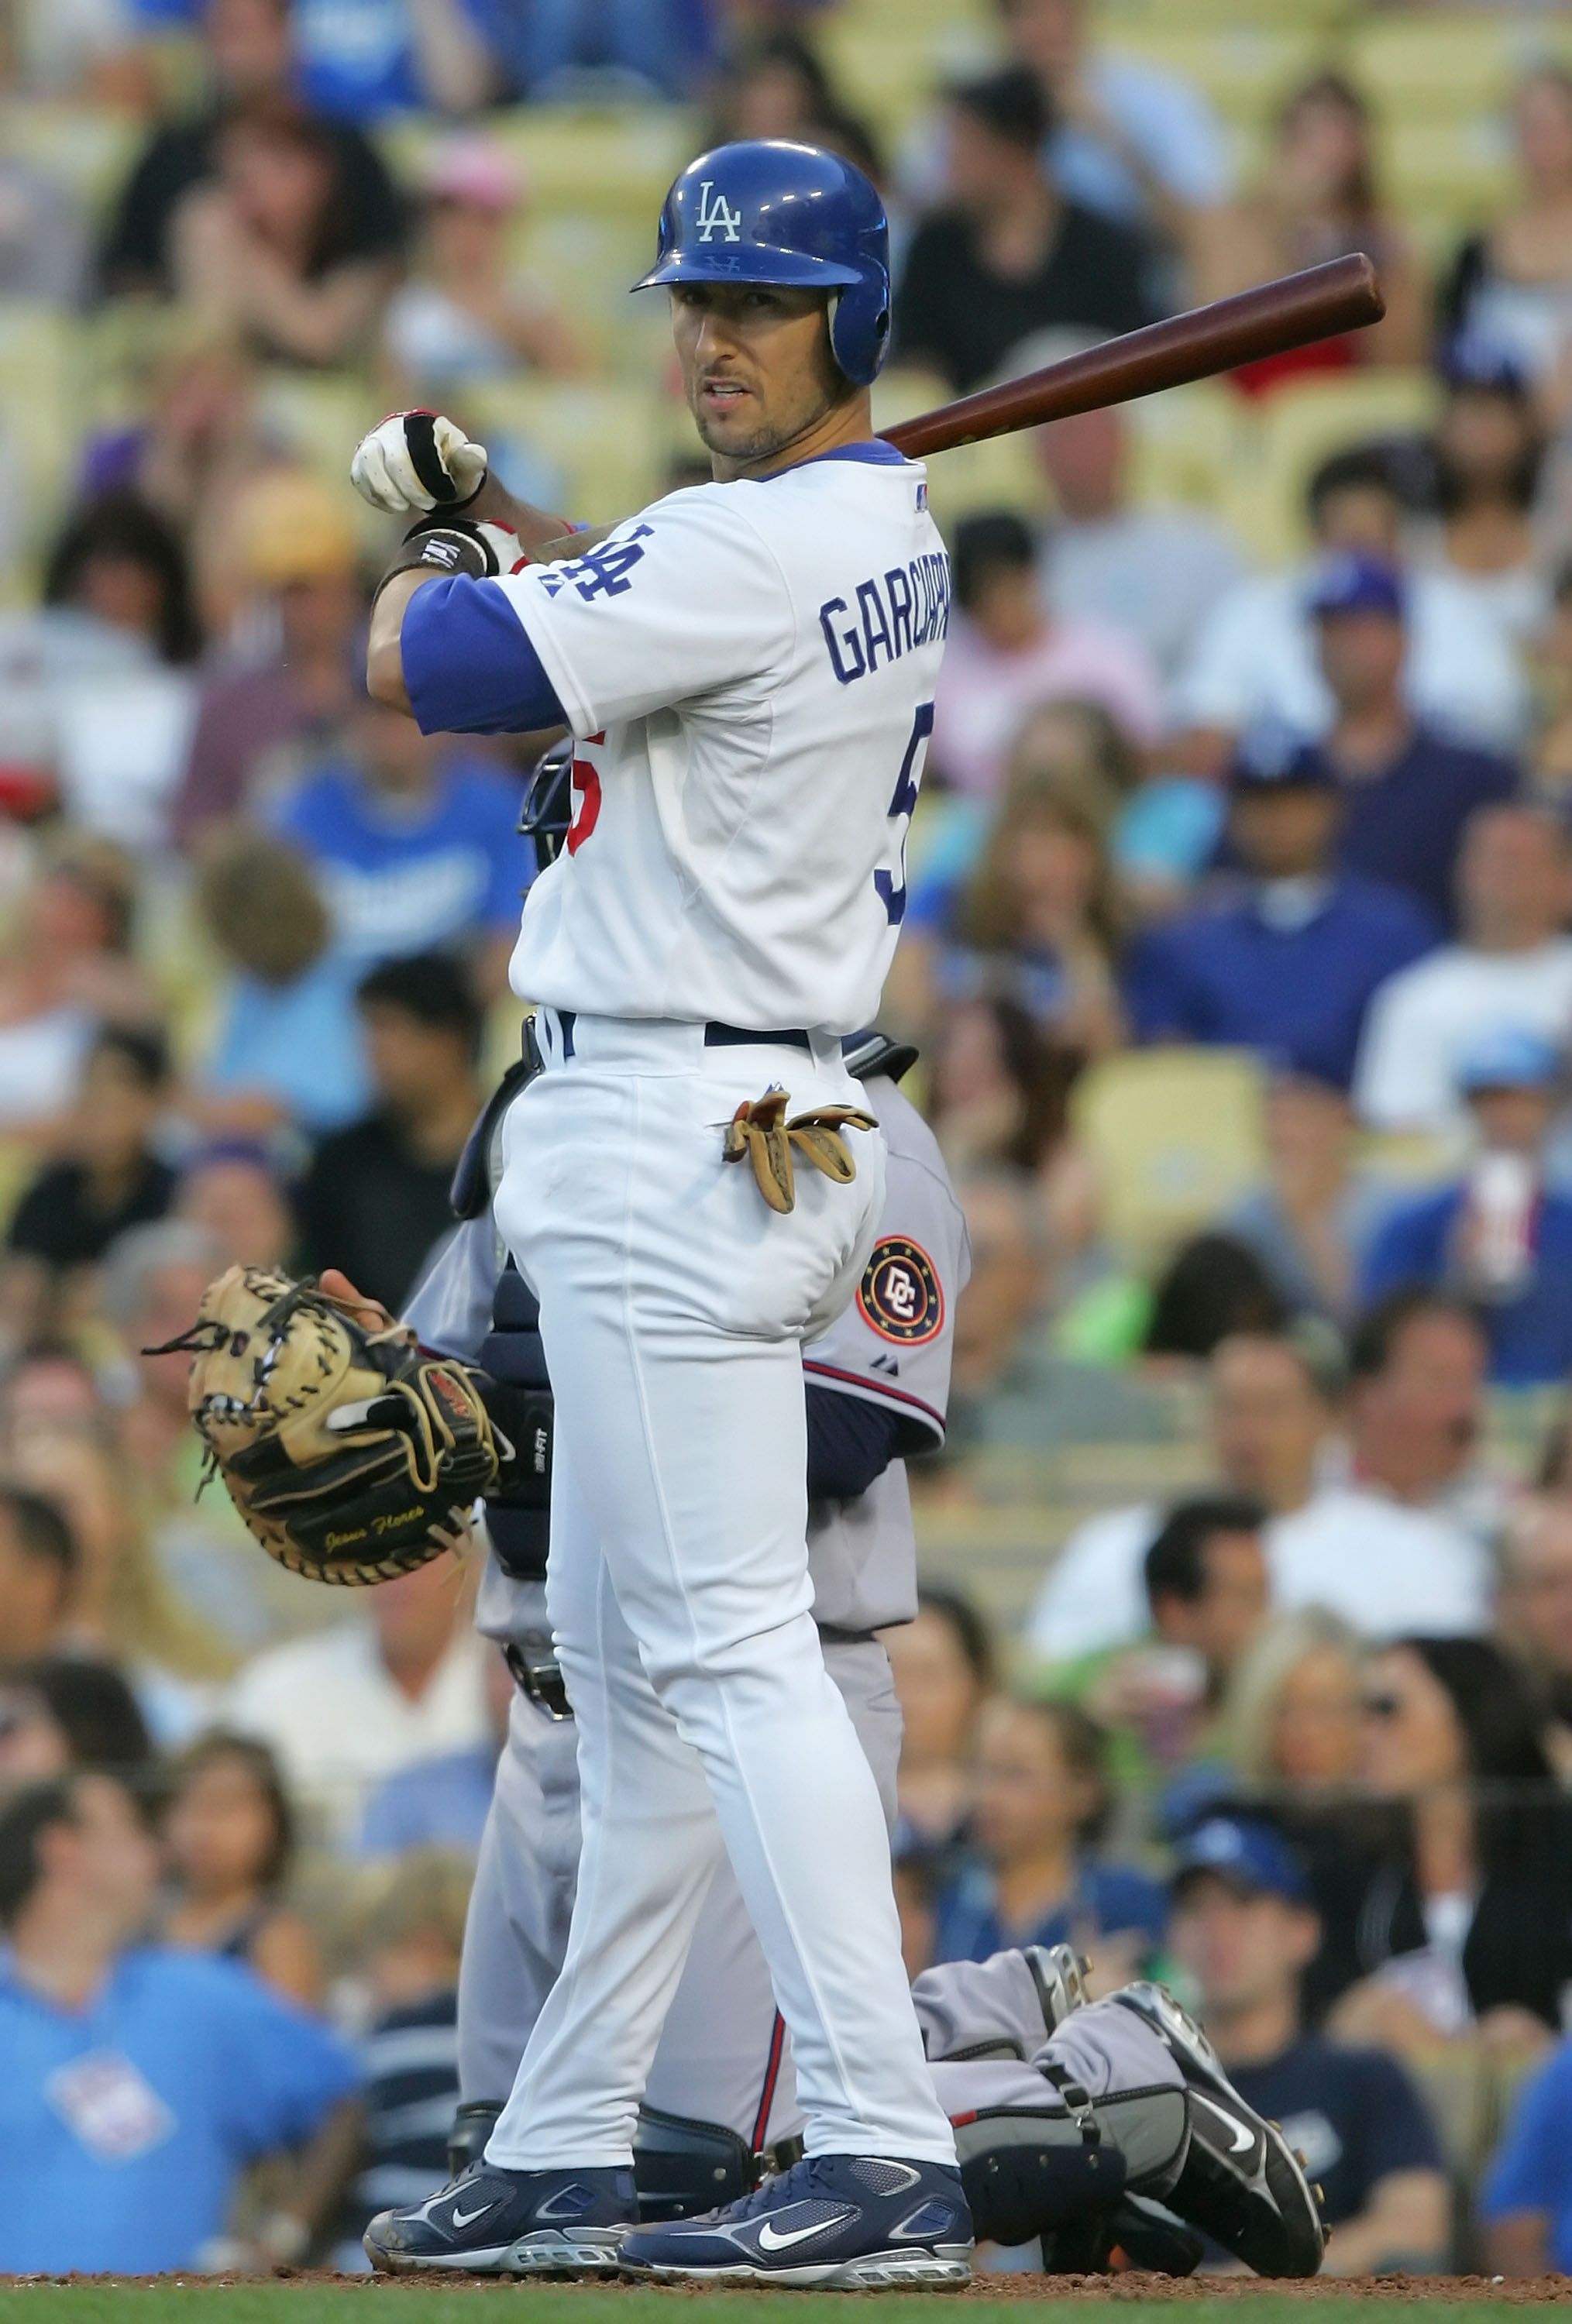 LOS ANGELES, CA - JULY 26:  Nomar Garciaparra #5 of the Los Angeles Dodgers prepares to bat against the Washington Nationals at Dodger Stadium on July 26, 2008 in Los Angeles, California.  (Photo by Lisa Blumenfeld/Getty Images)